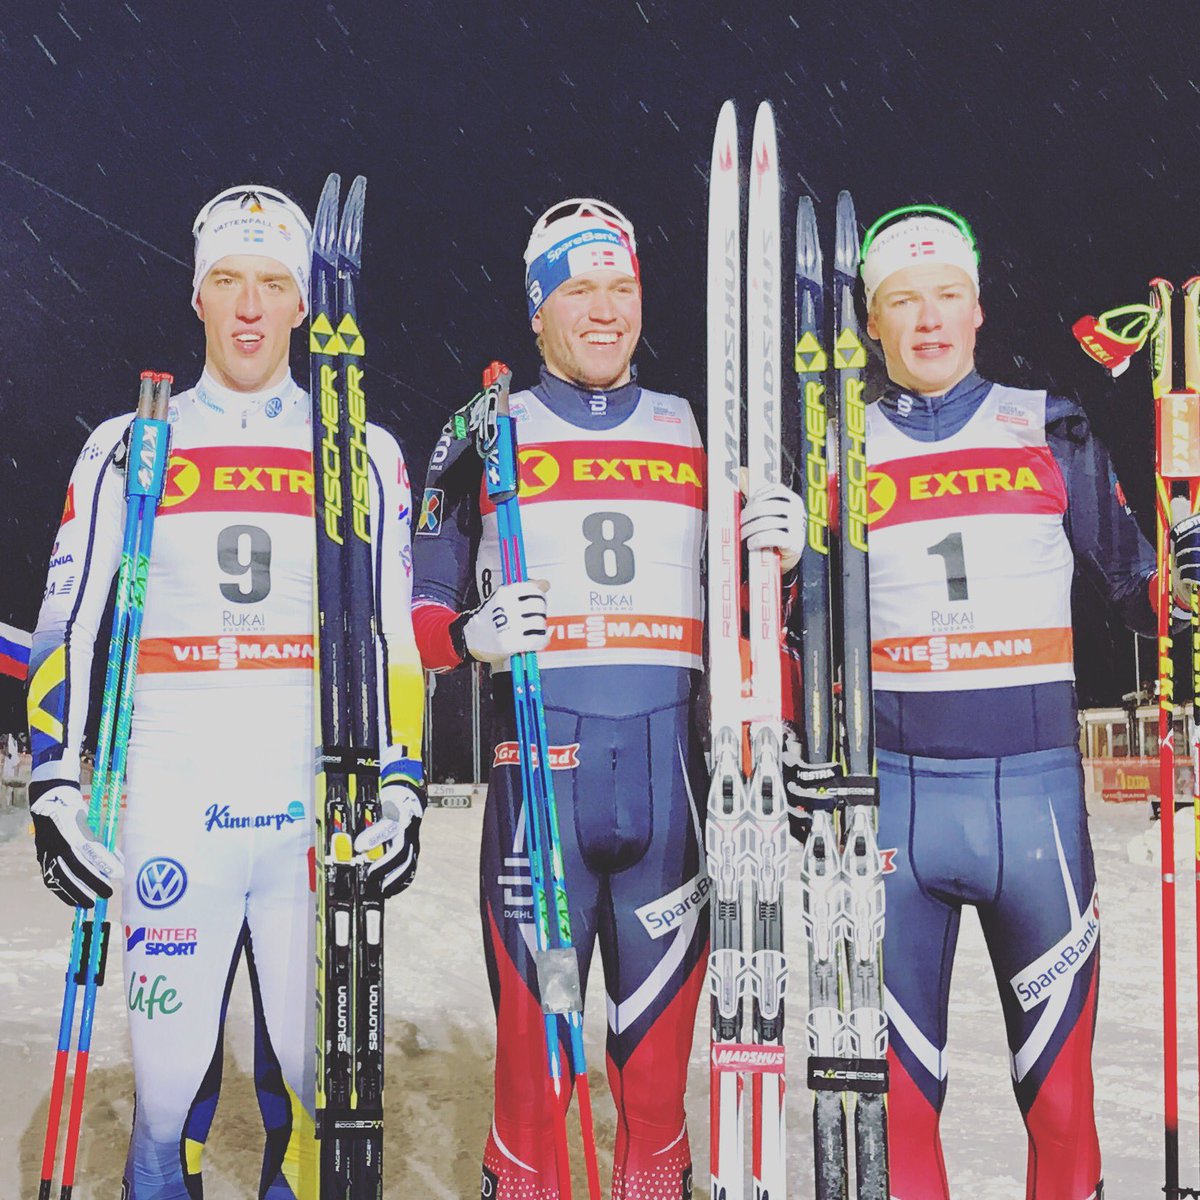 The men's classic sprint podium in the first World Cup race of the season on Saturday in Kuusamo, Finland: Norway's Pål Golberg (c) placed first, Sweden's Calle Halfvarsson (l) was second, and Norway's 20-year-old Johannes Klaebo (r) was third. (Photo: FIS Cross Country Twitter)